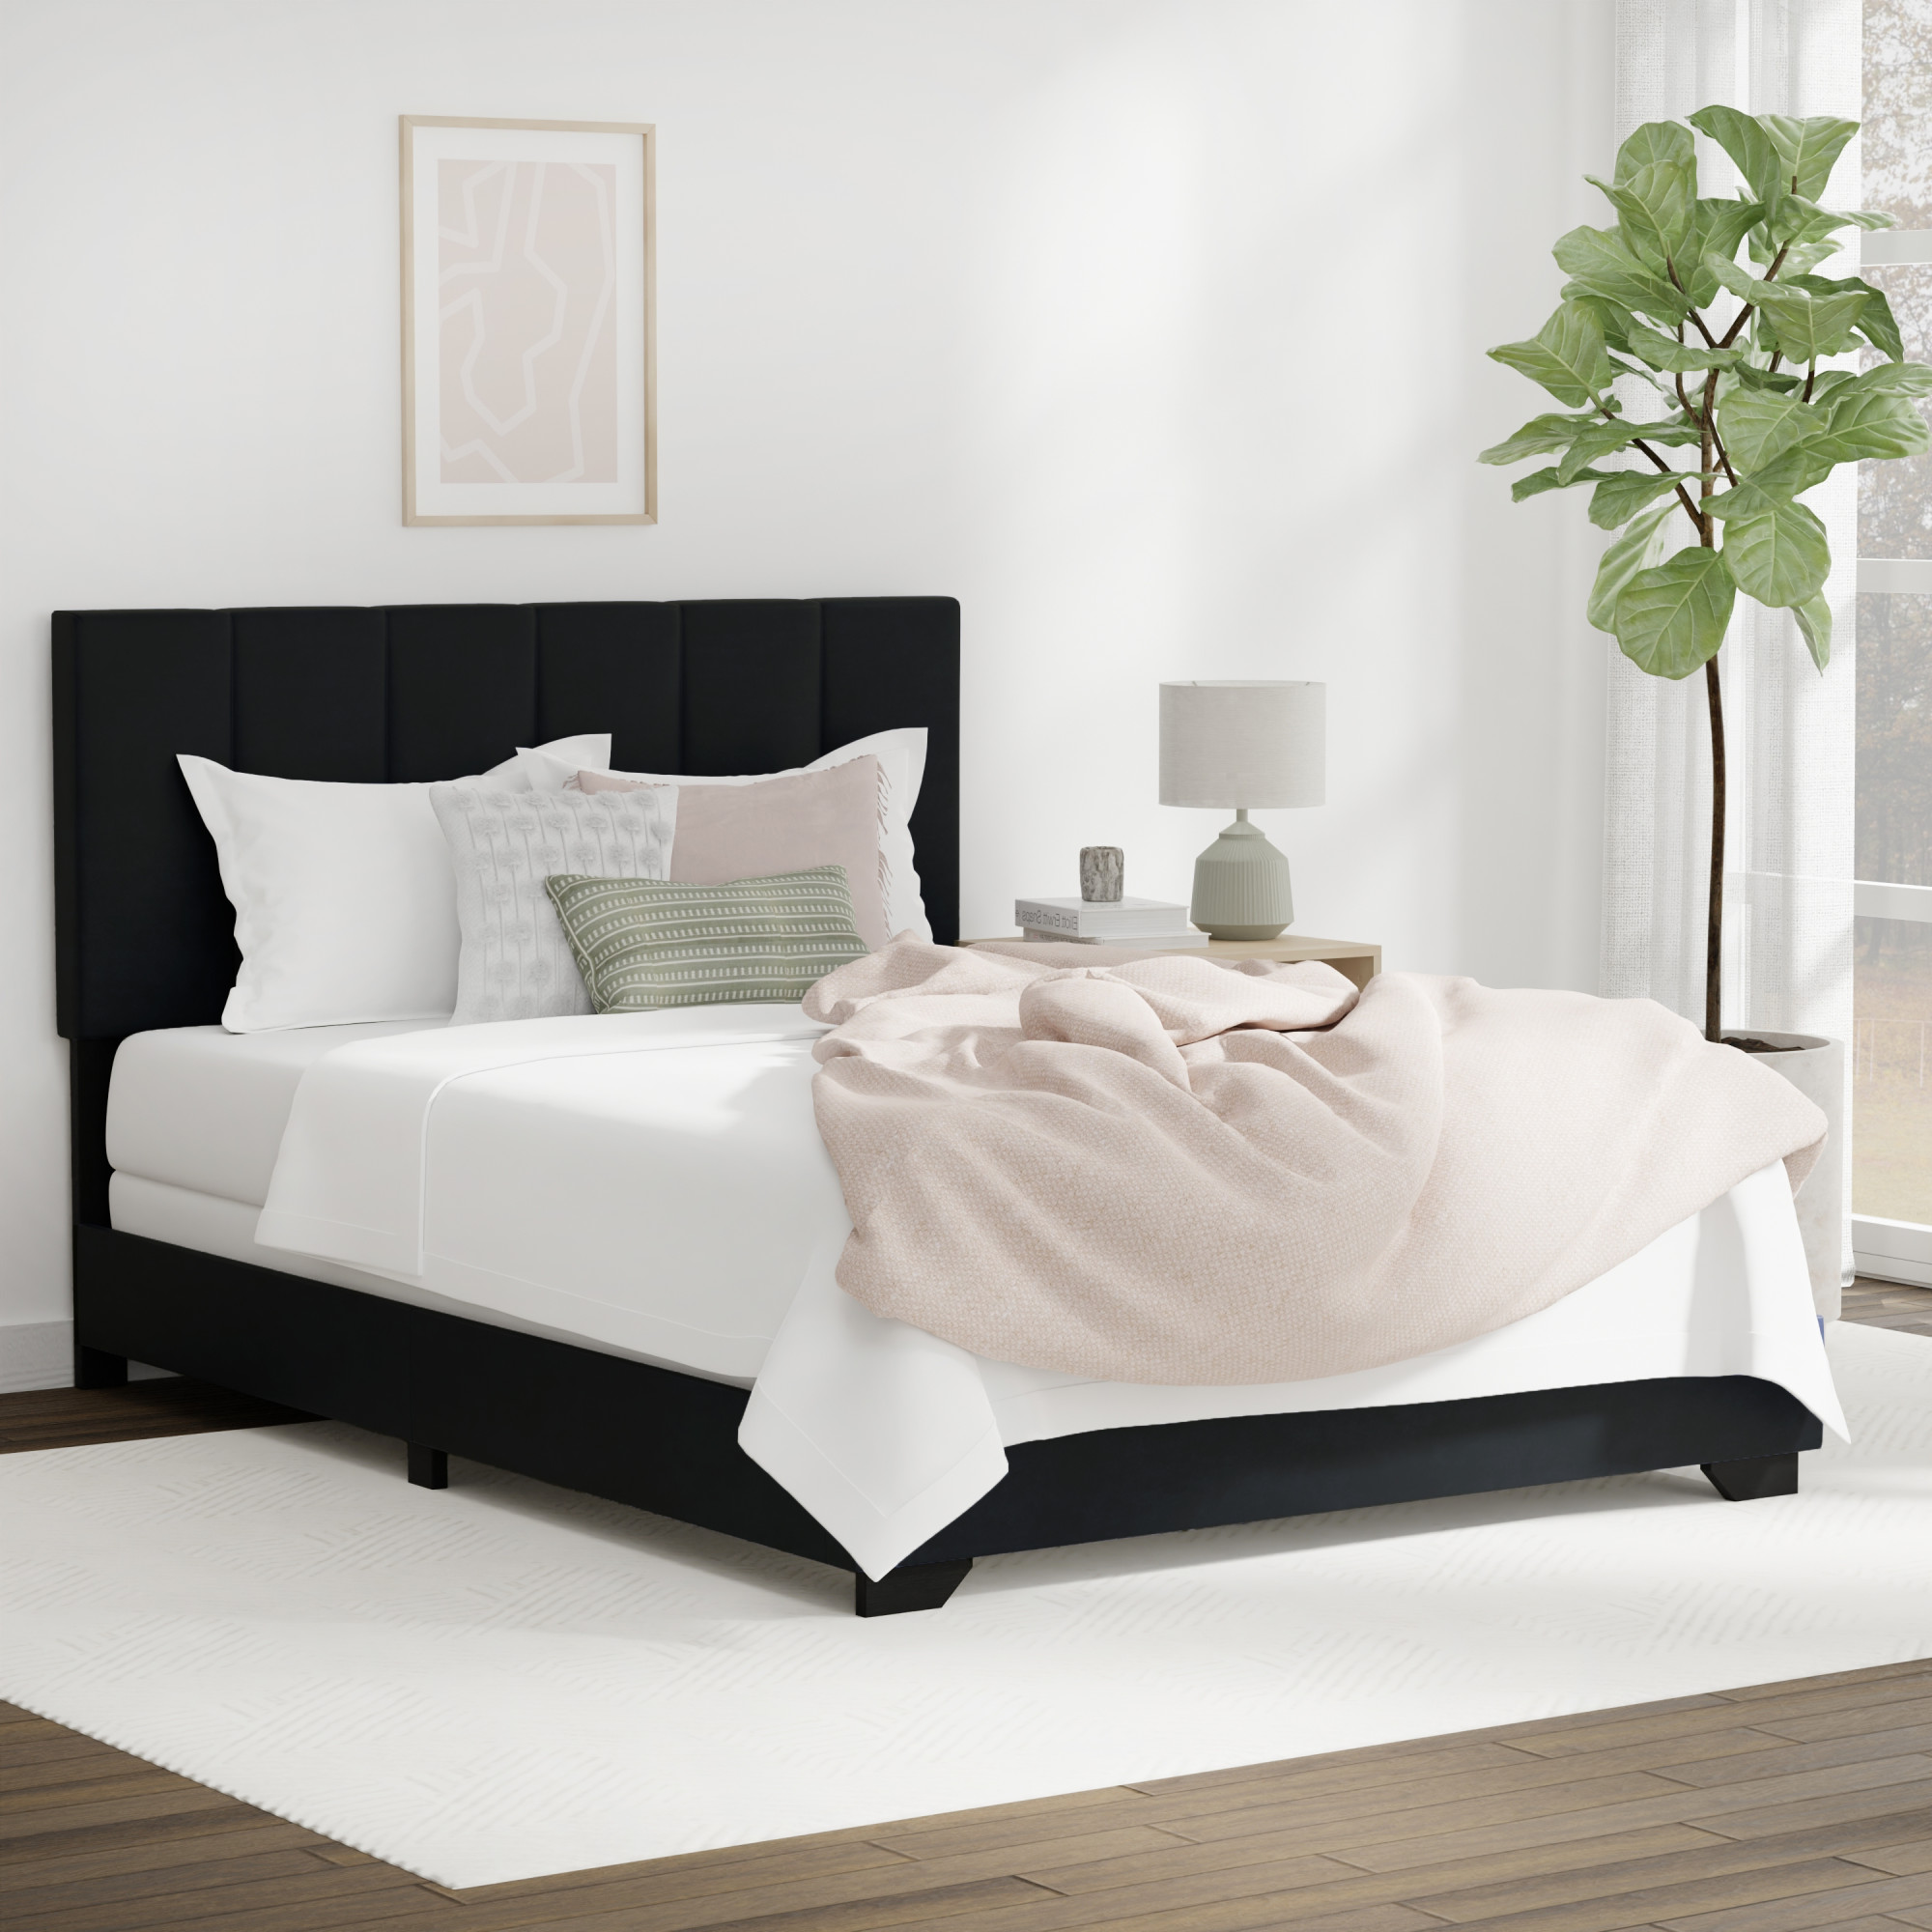 Reece Channel Stitched Upholstered Full Bed, Black, by Hillsdale Living Essentials - image 1 of 17